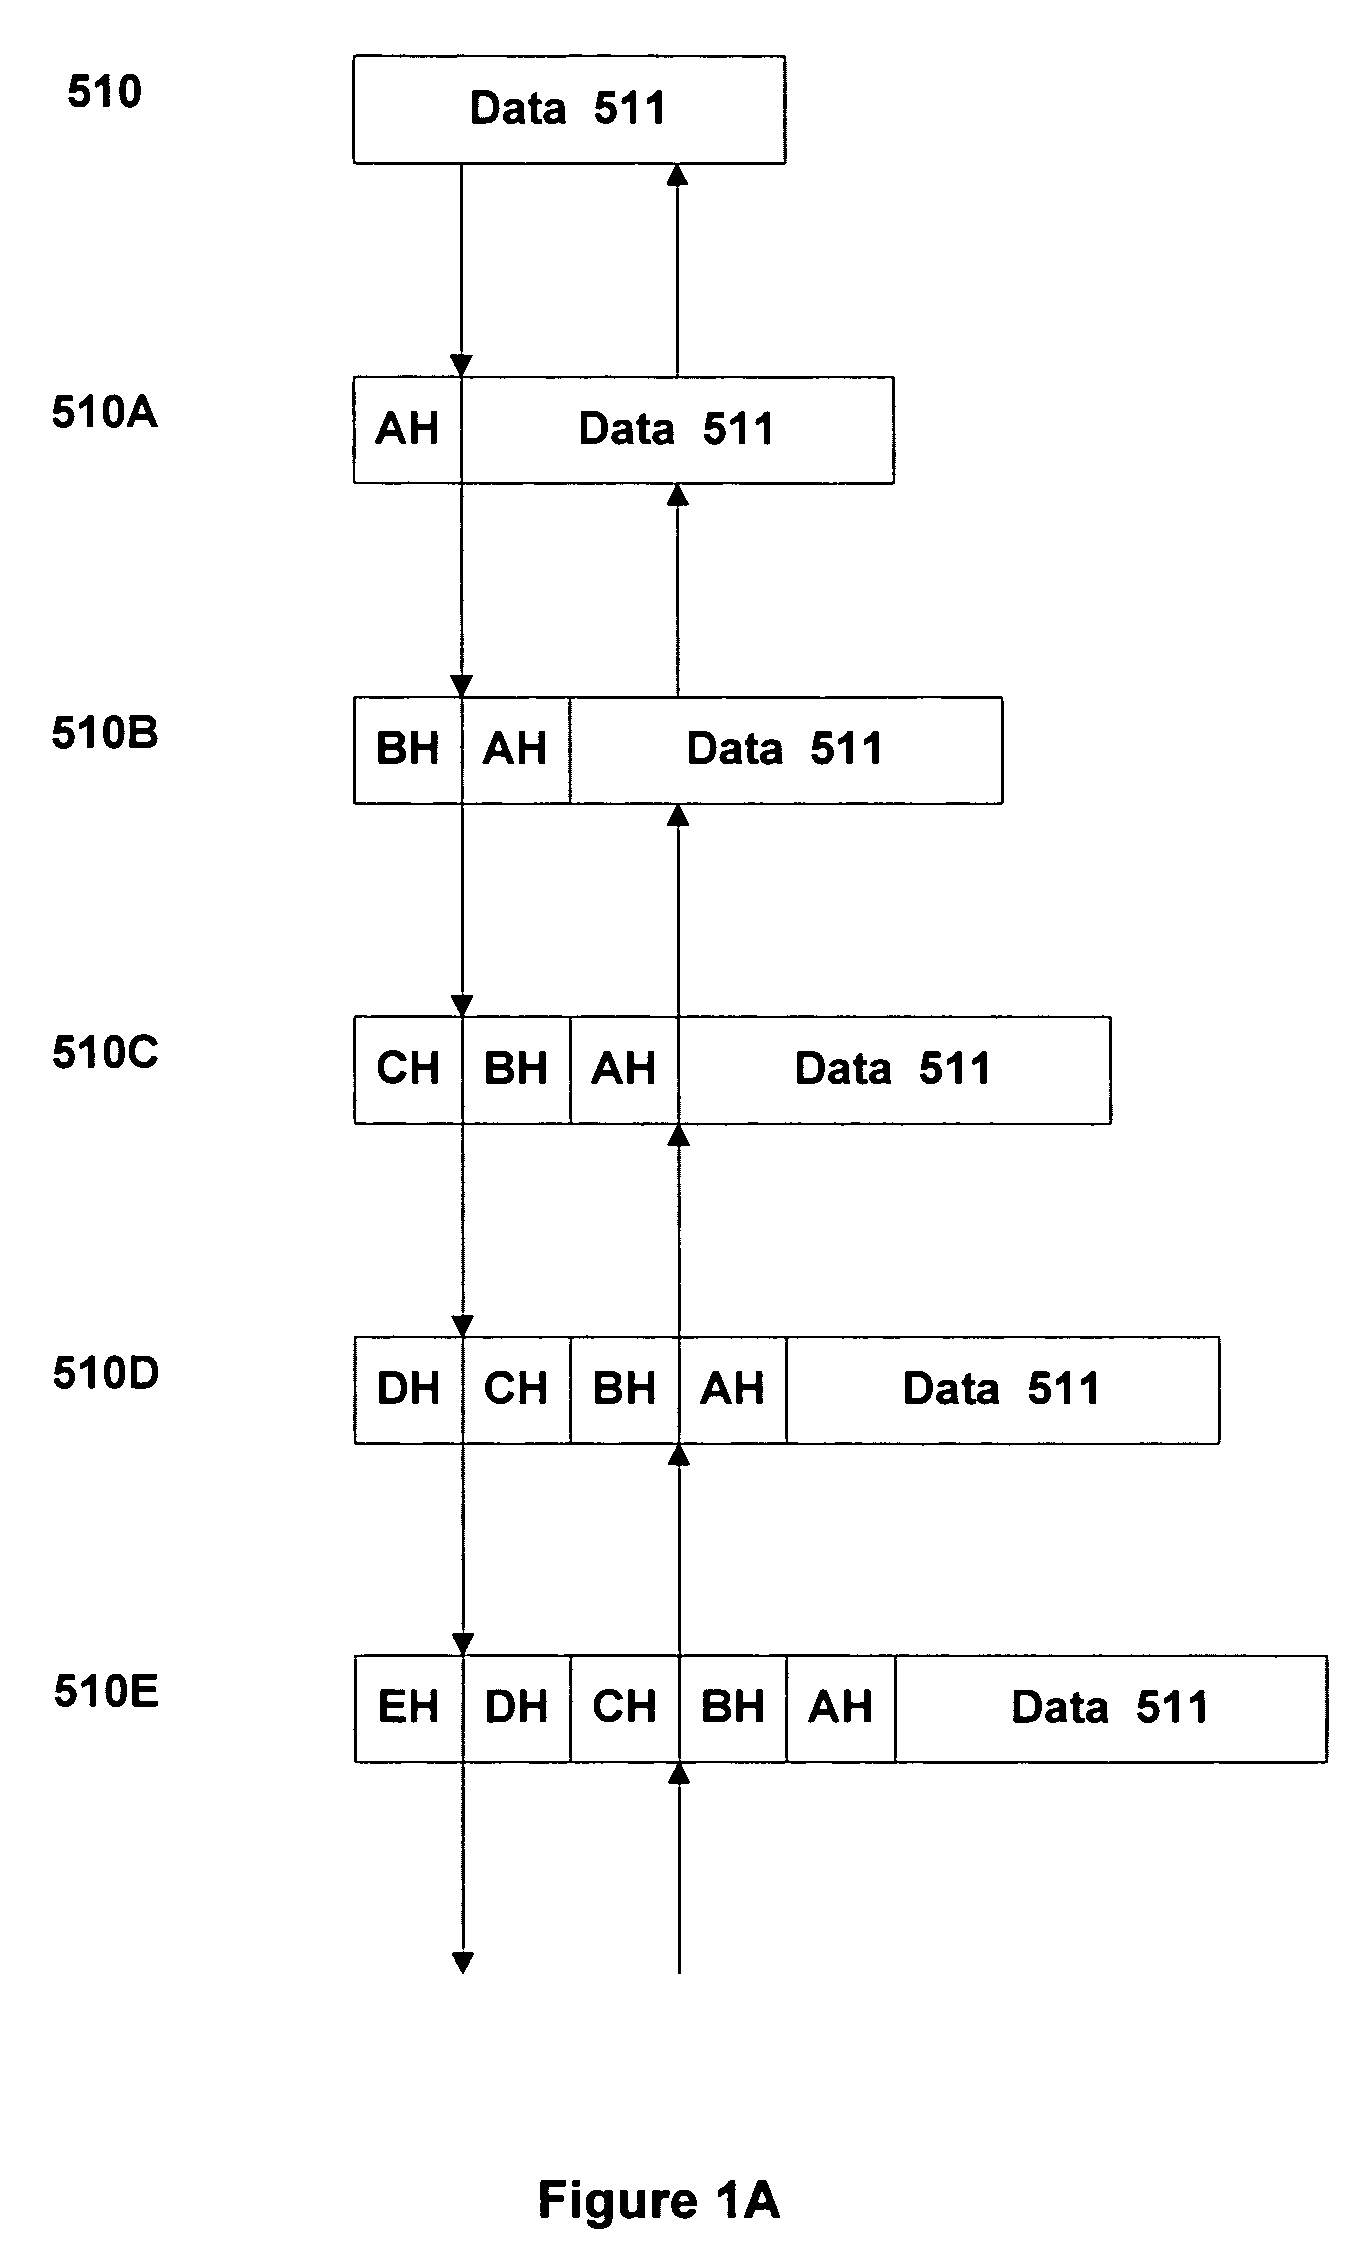 Method and apparatus for performing address translation in a computer system